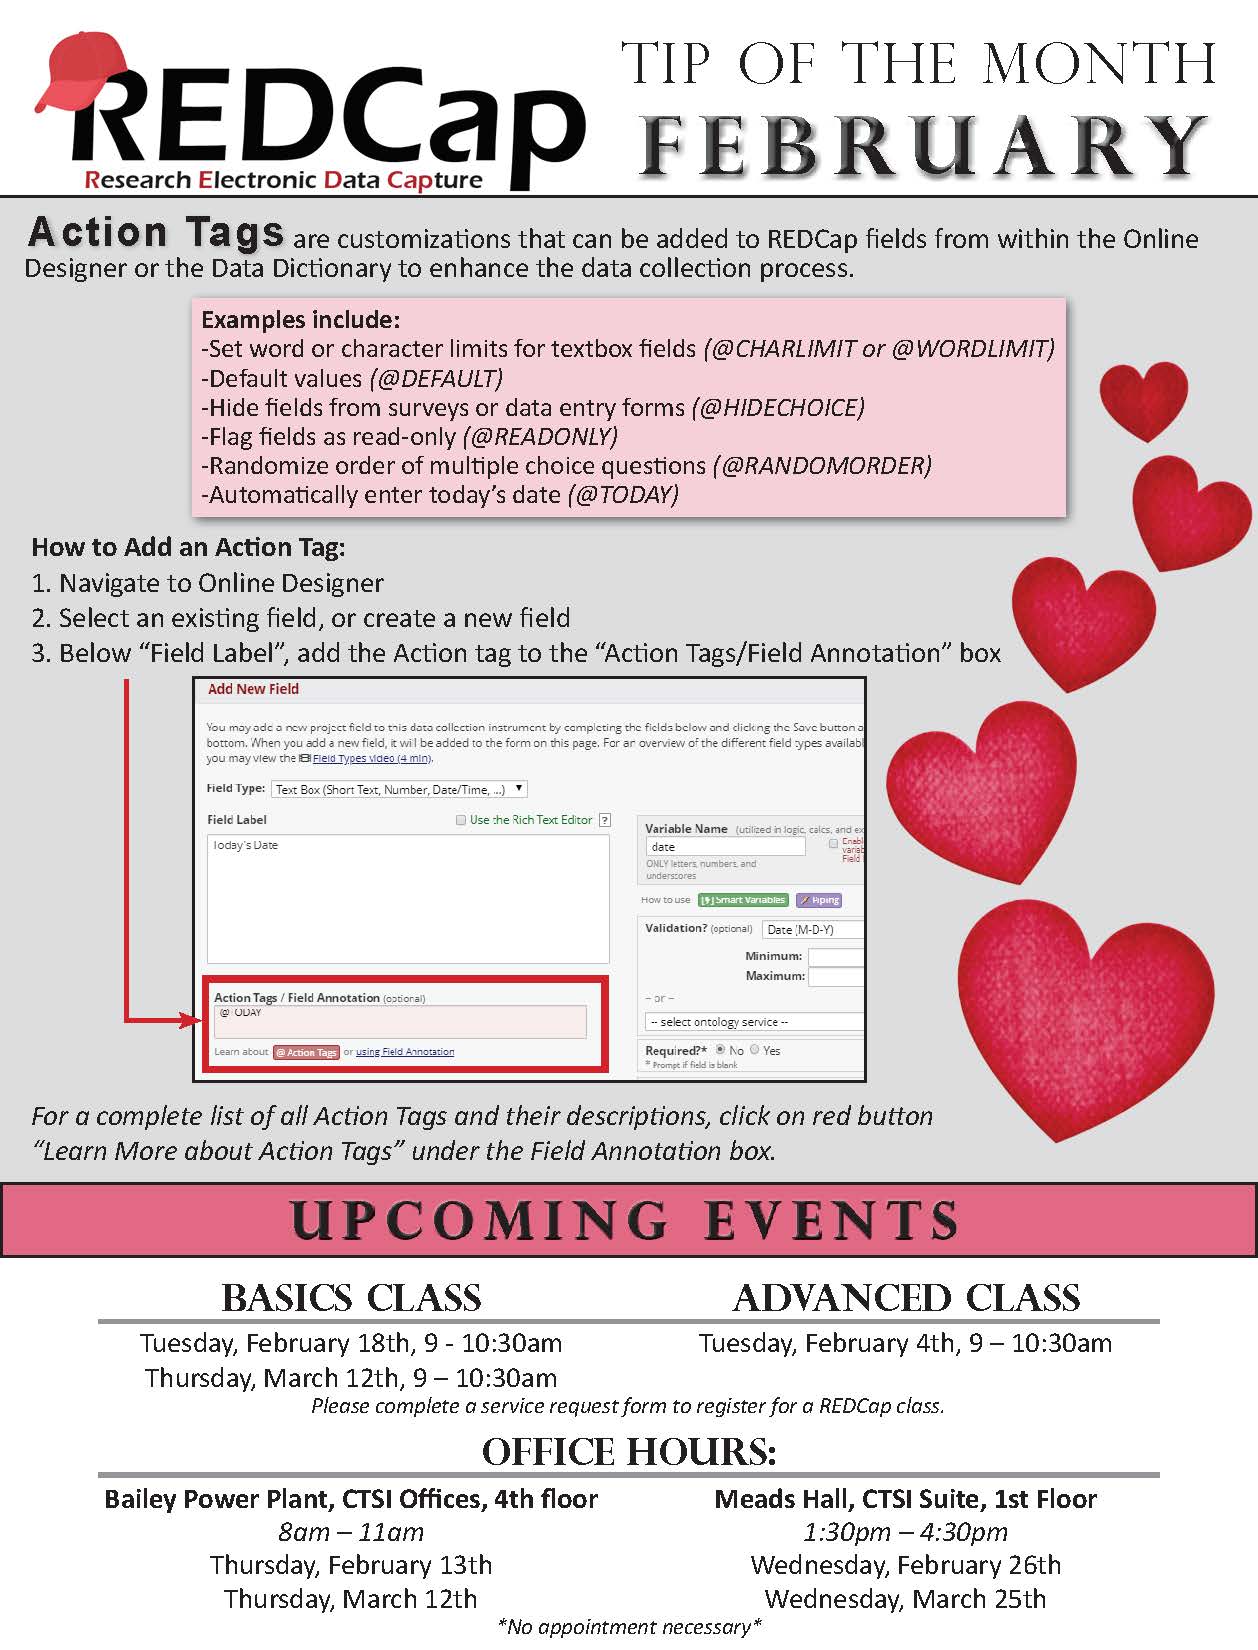 REDCap February Tip of the Month poster: Action Tags